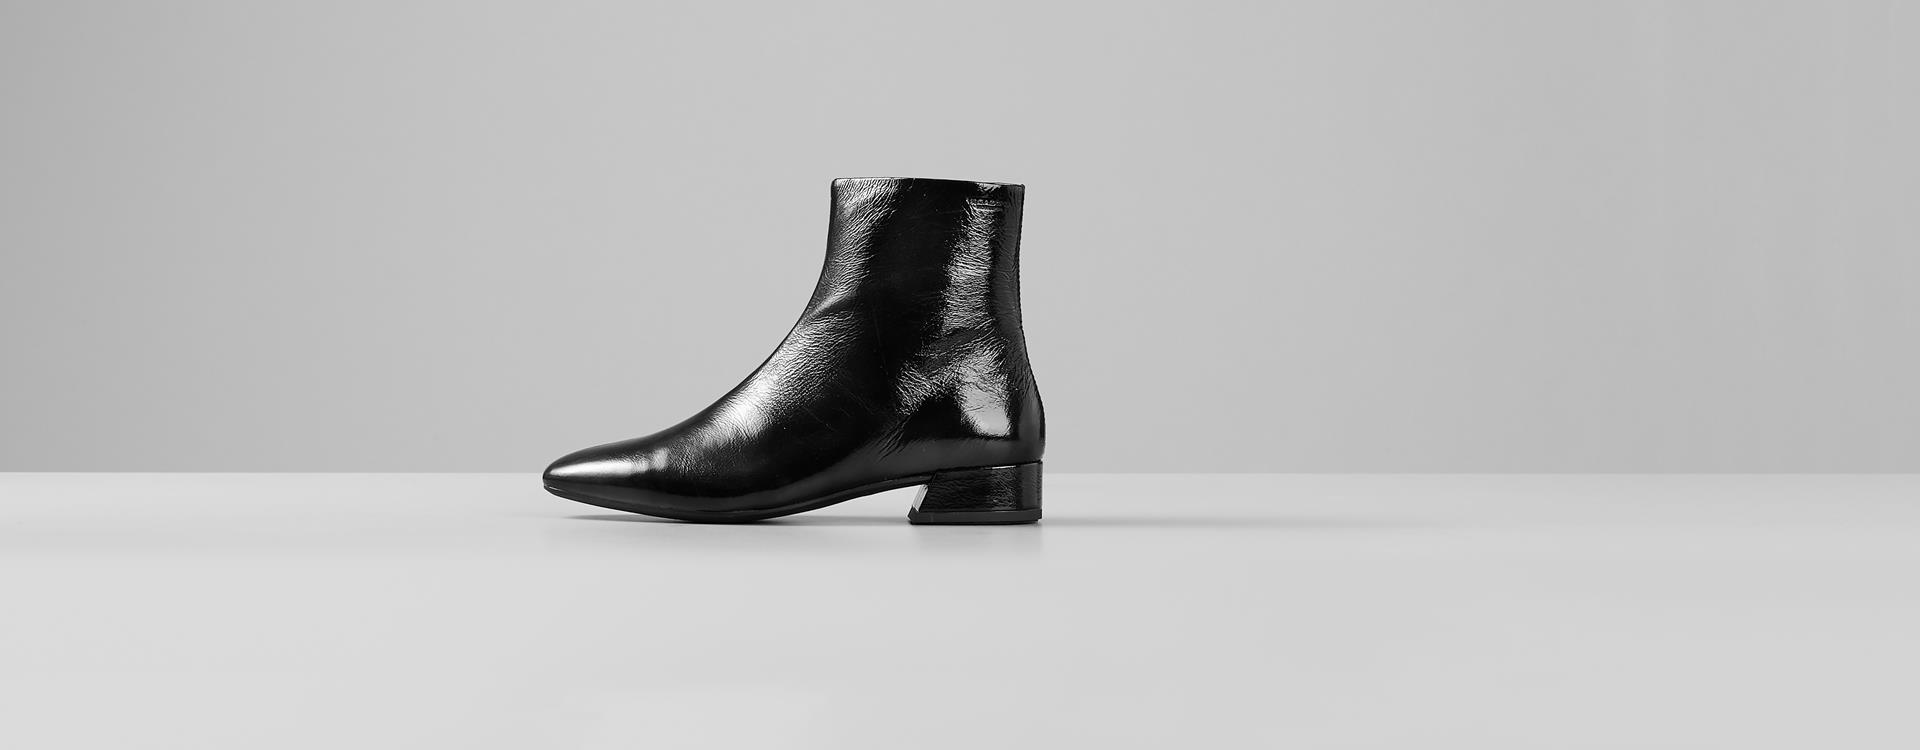 shiny black ankle boots